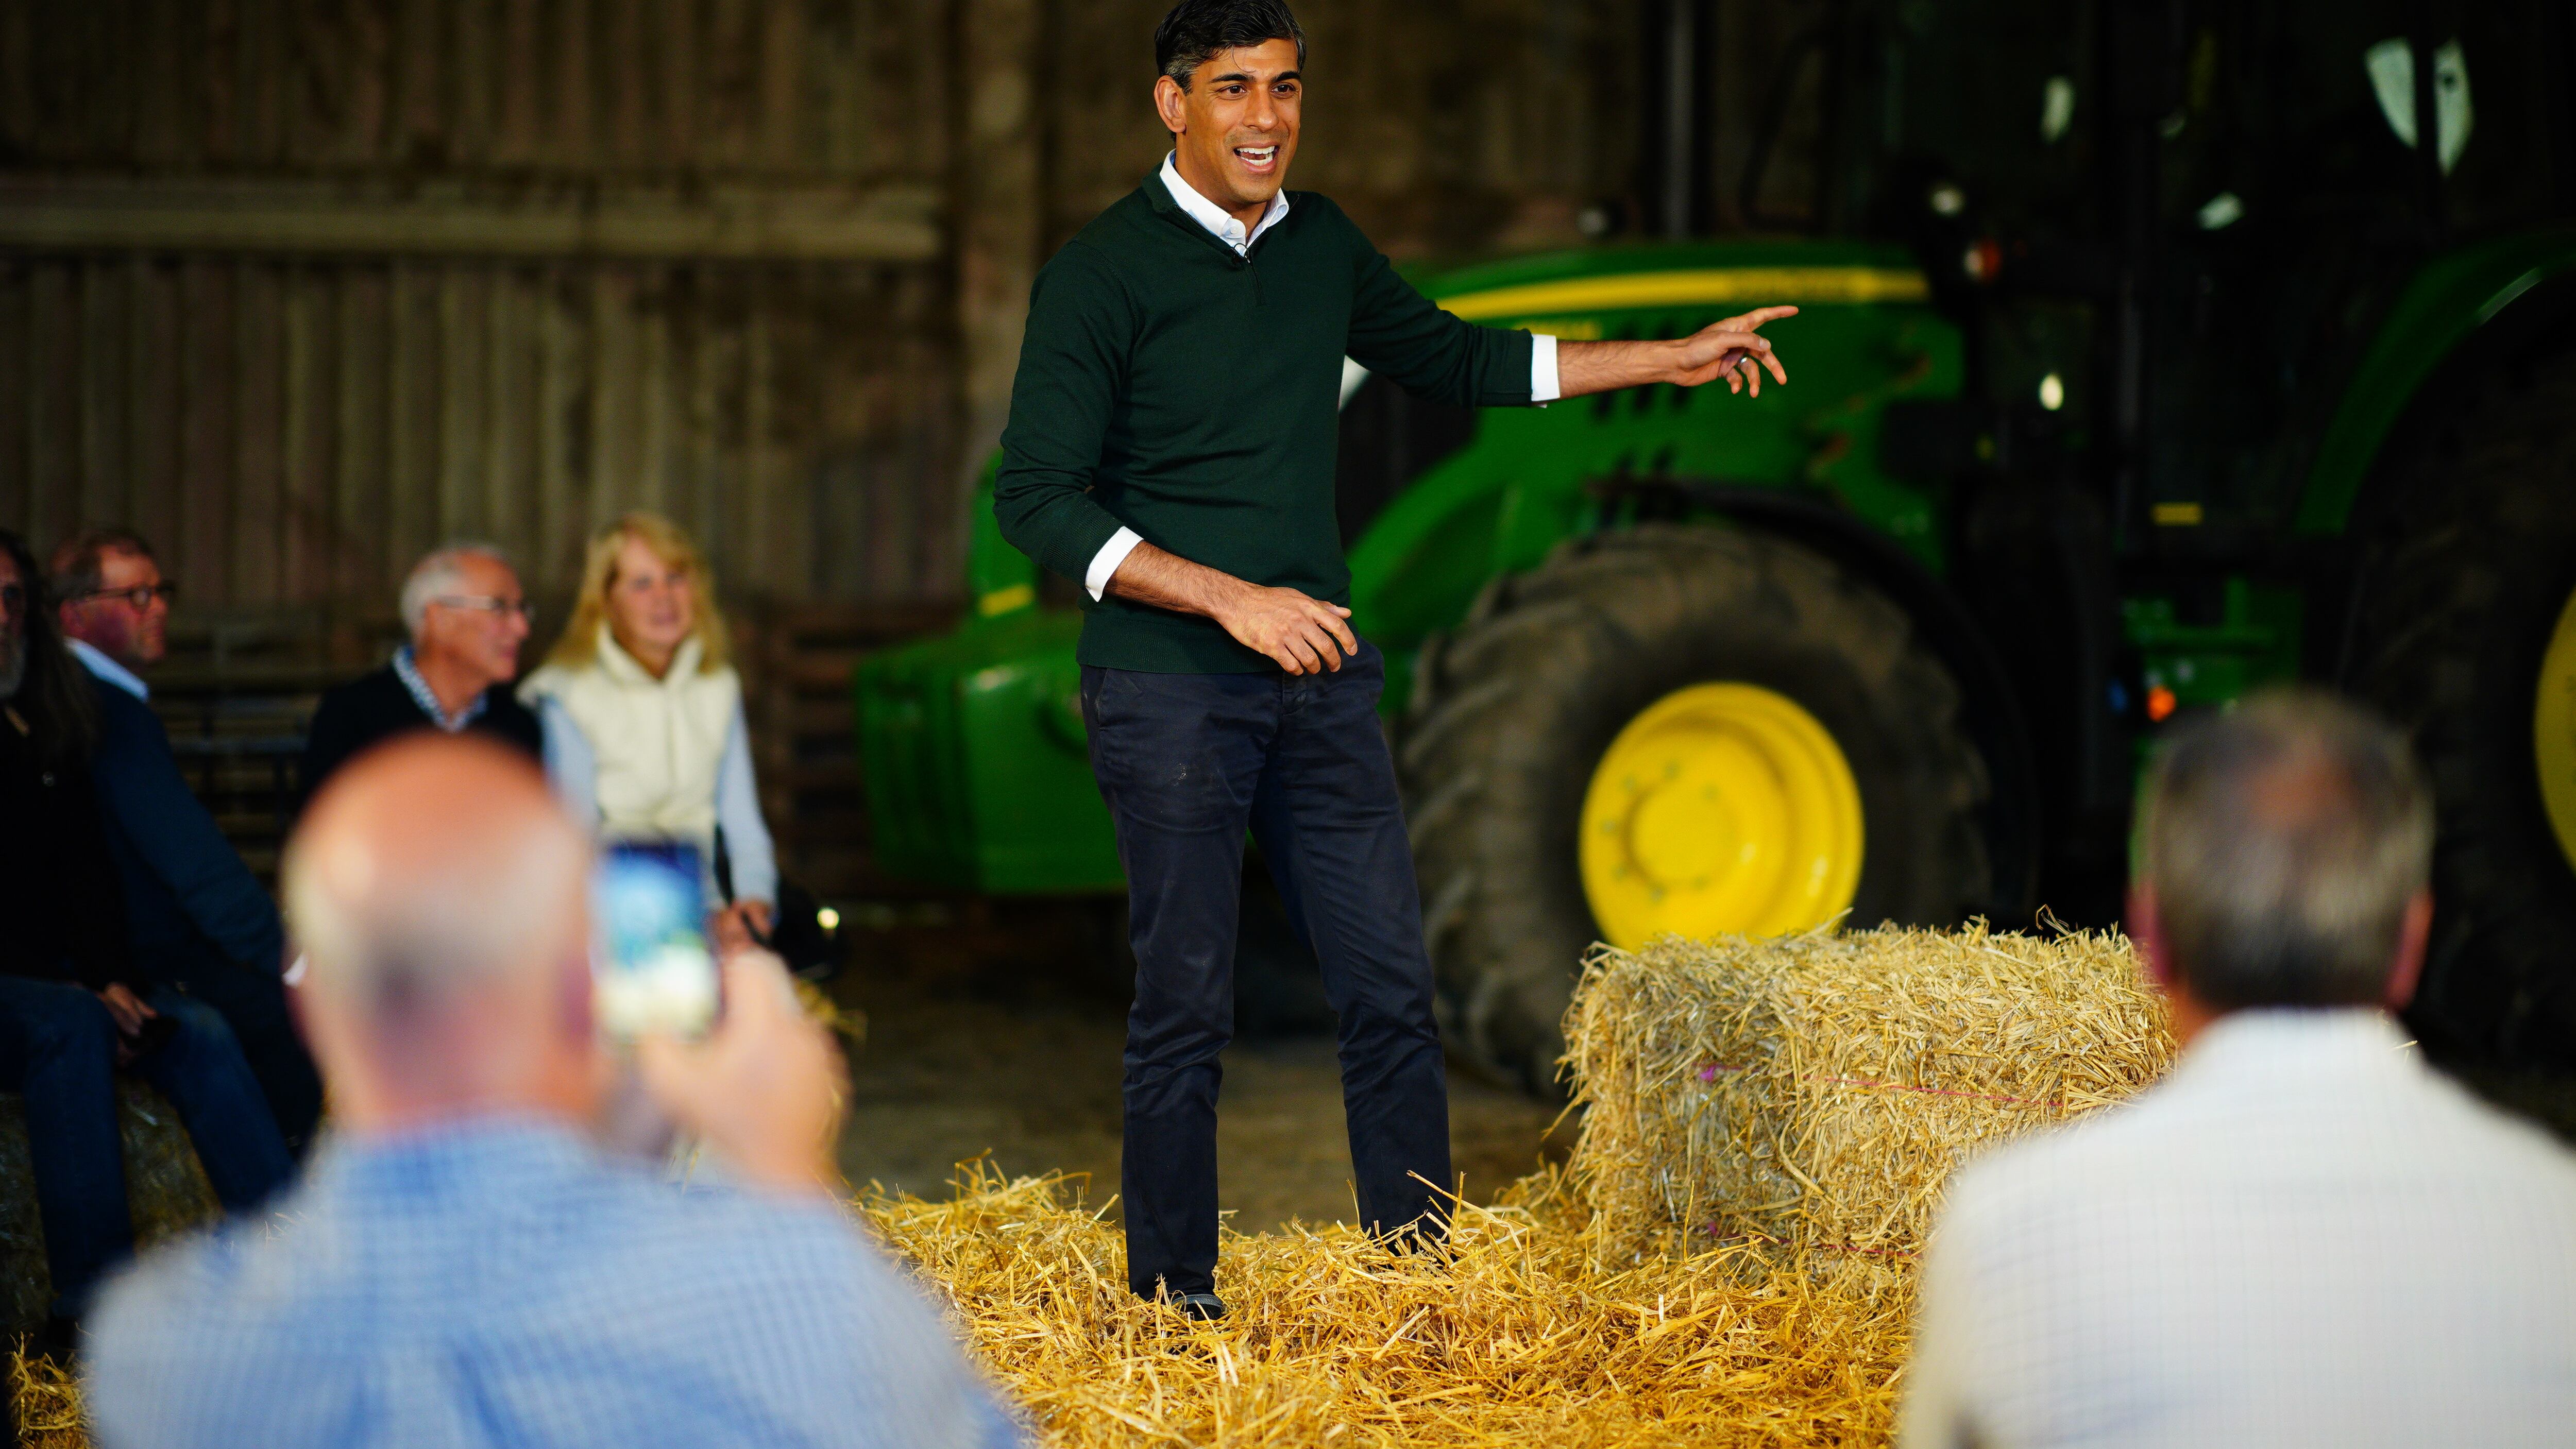 Prime Minister Rishi Sunak hosts a Q&A session during a visit to a farm in Devon, while on the General Election campaign trail